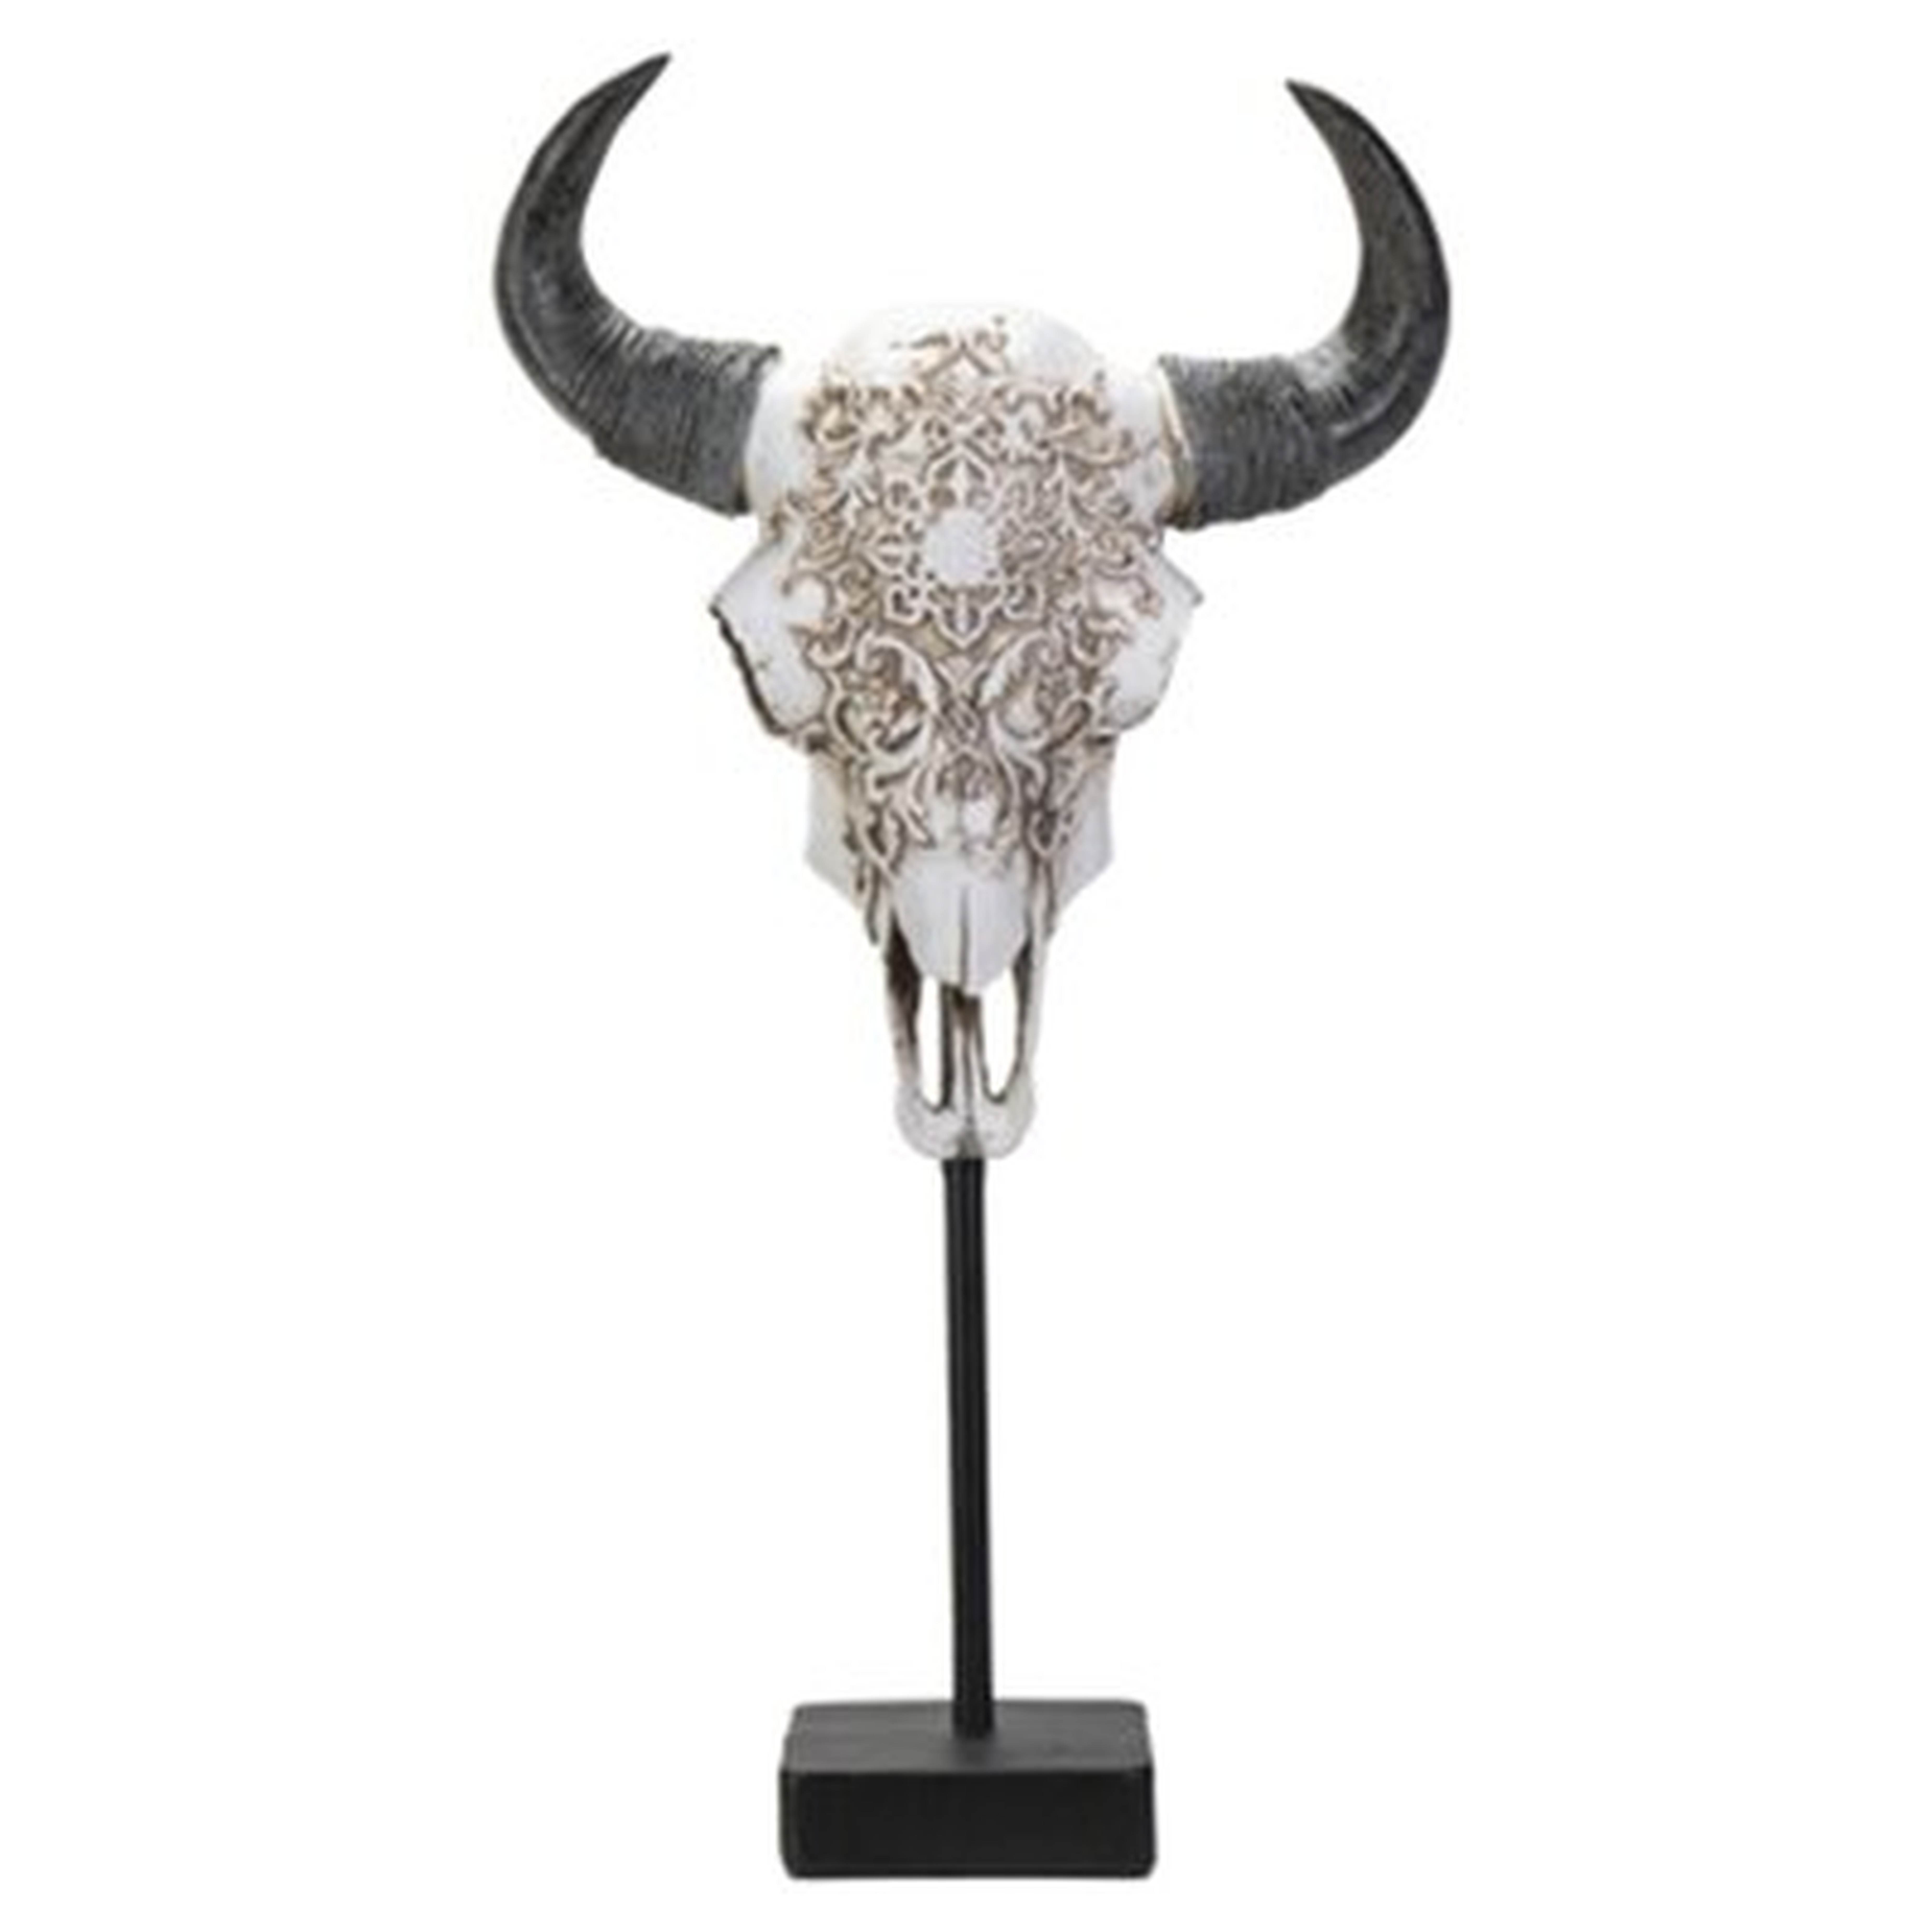 Faux Taxidermy Cutout Designed Bison Skull Replica Bust With Black Stand 17.3"h - Wayfair